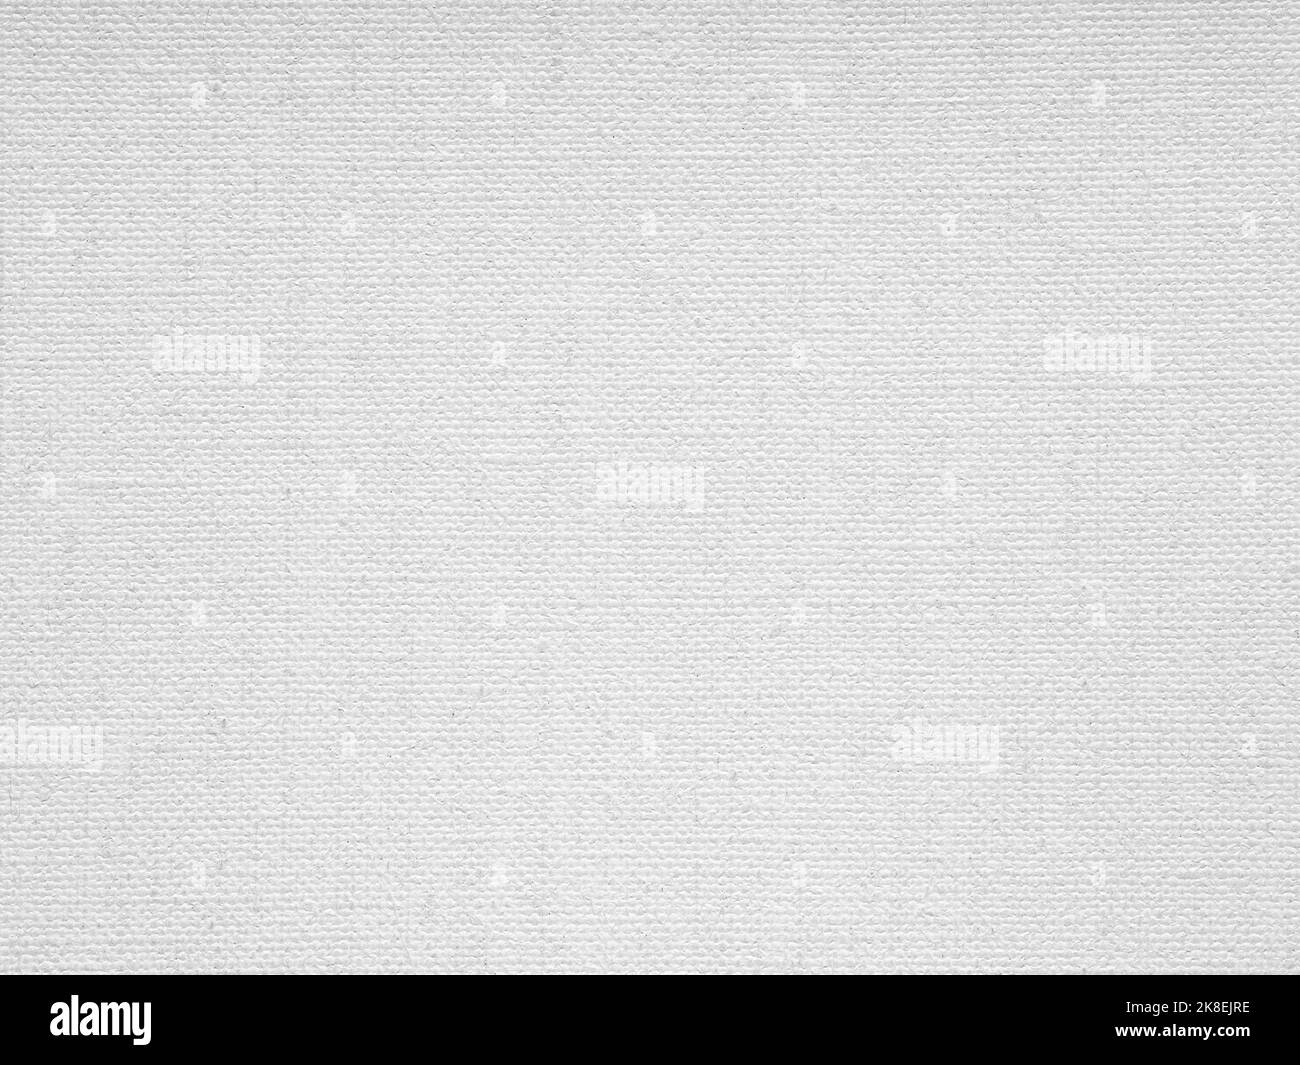 Canvas Texture Coated by White Primer. Stock Image - Image of